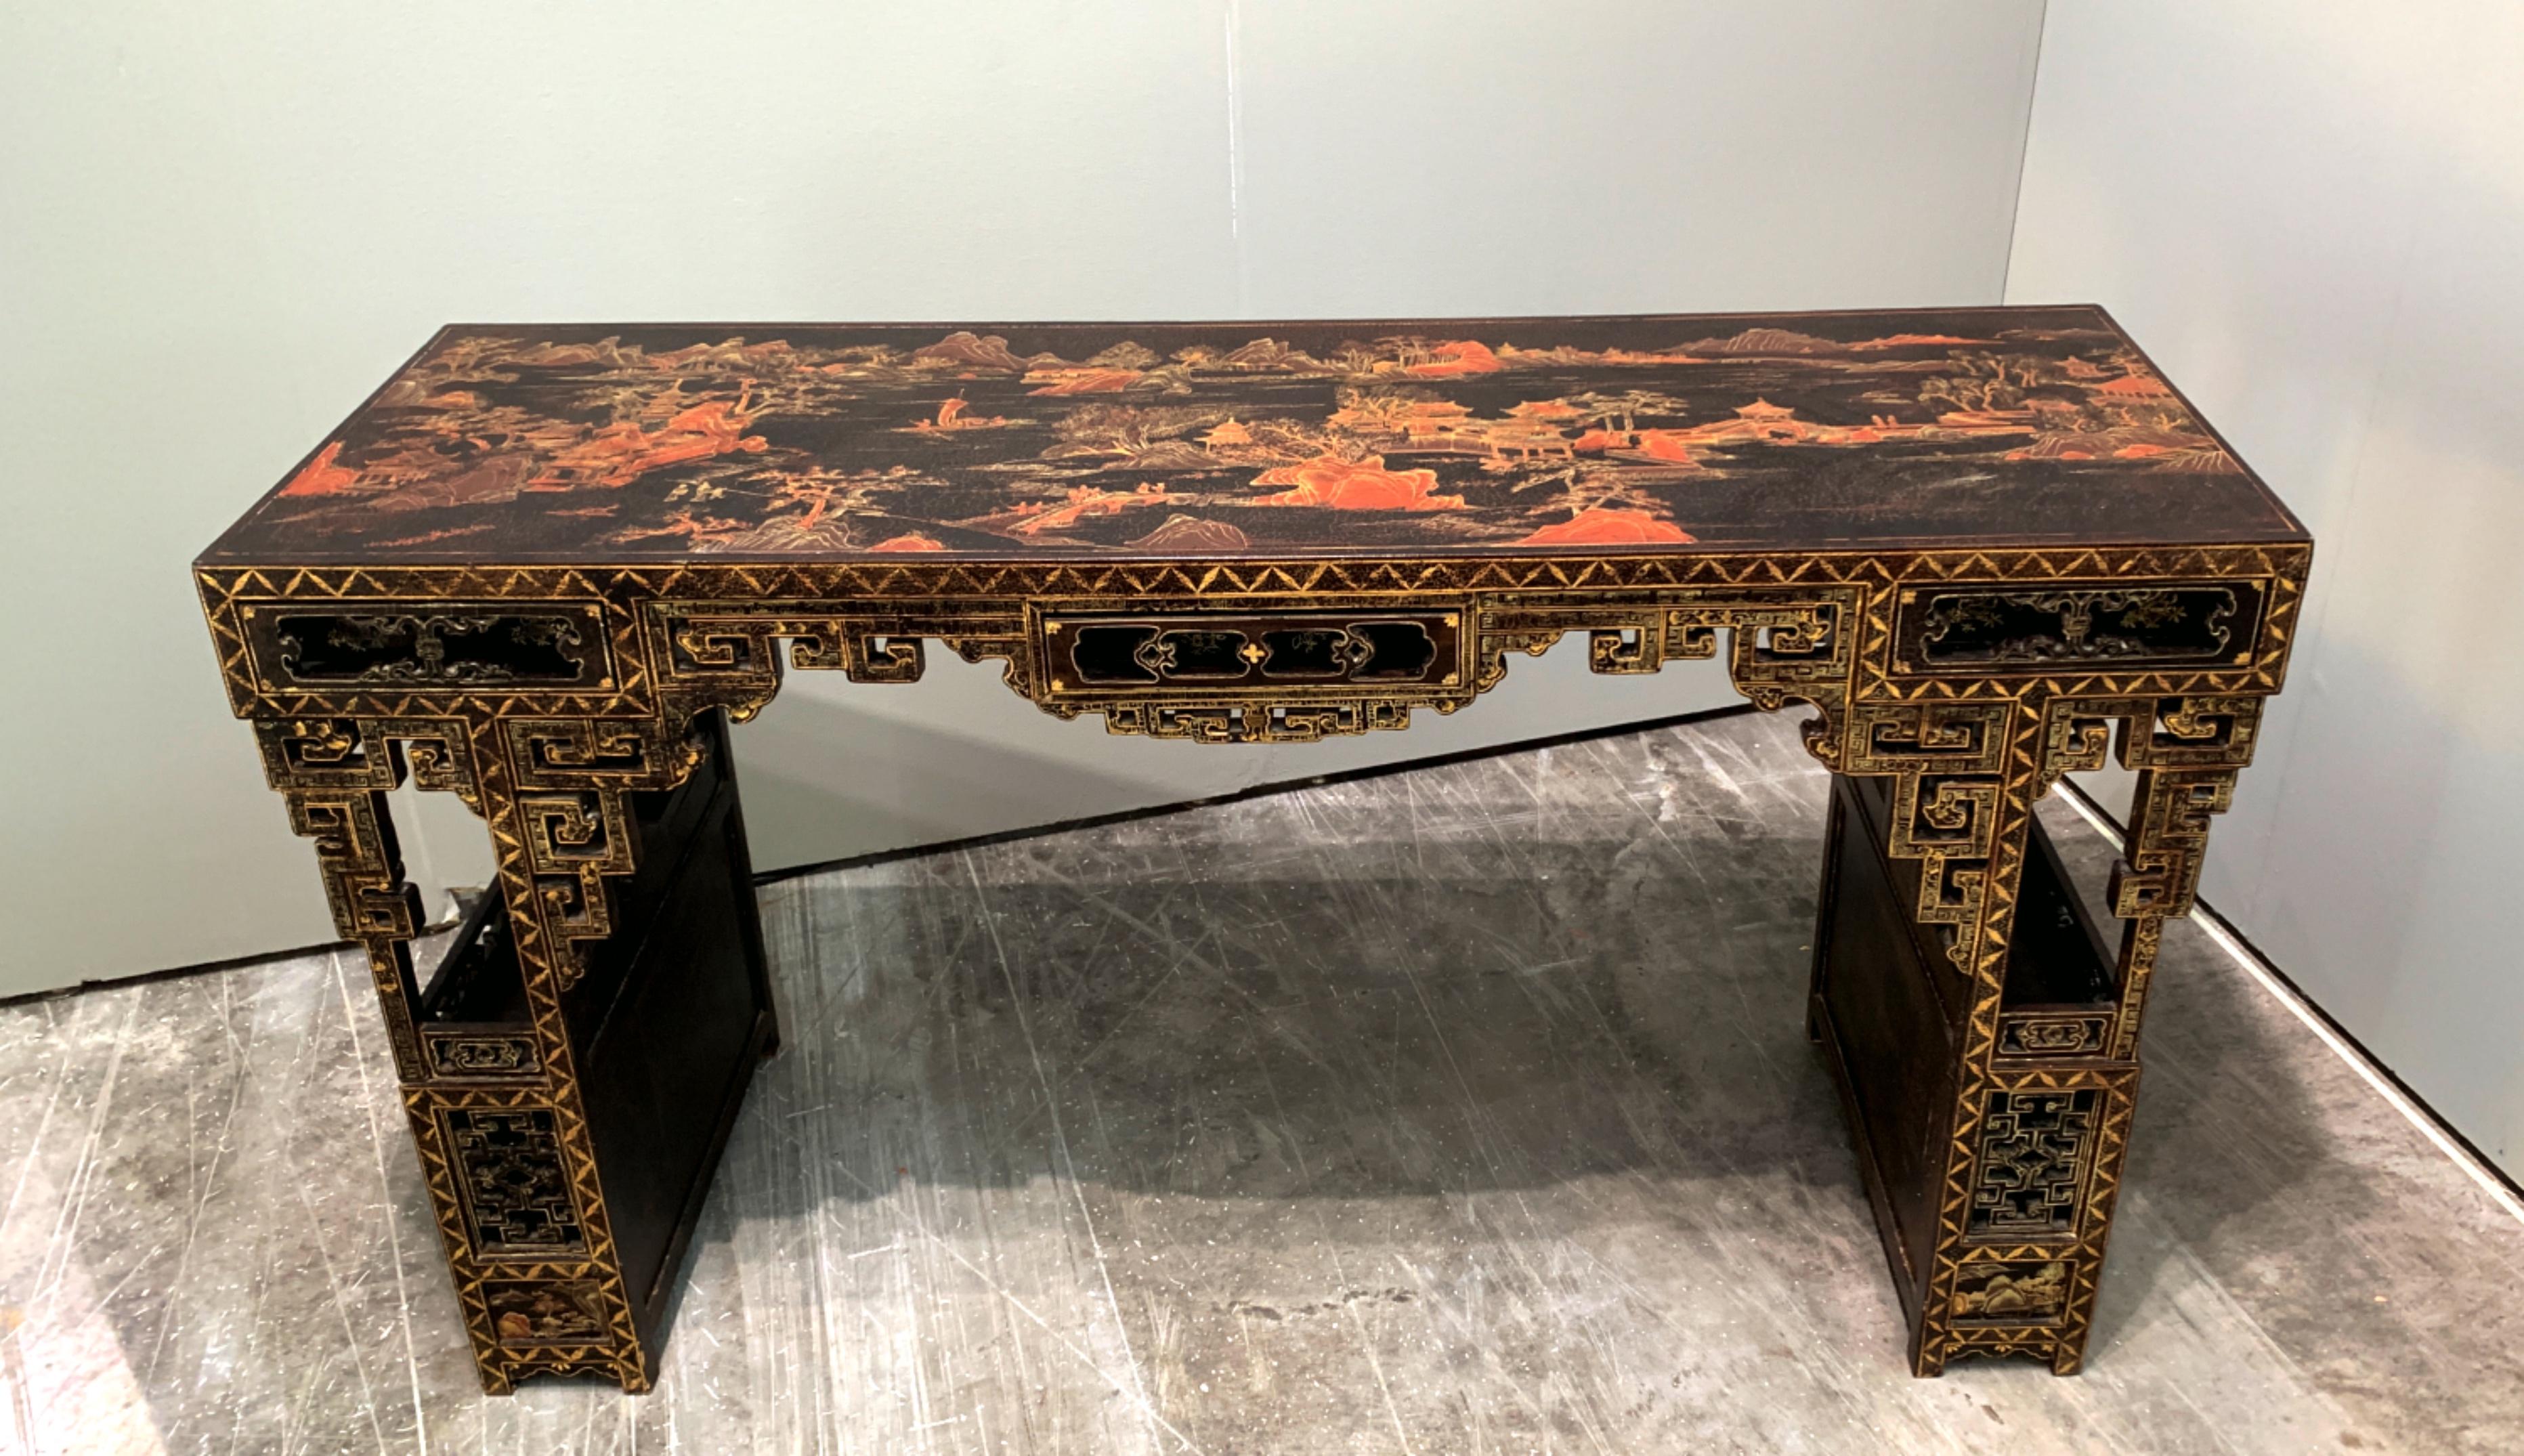 A sumptuously elegant Chinese gilt and red lacquer painted black lacquer console or painting table, Qing Dynasty, late 19th century.

The top of this gorgeous table painted in red lacquer and gilt with a lovely shan shui (mountain and water)